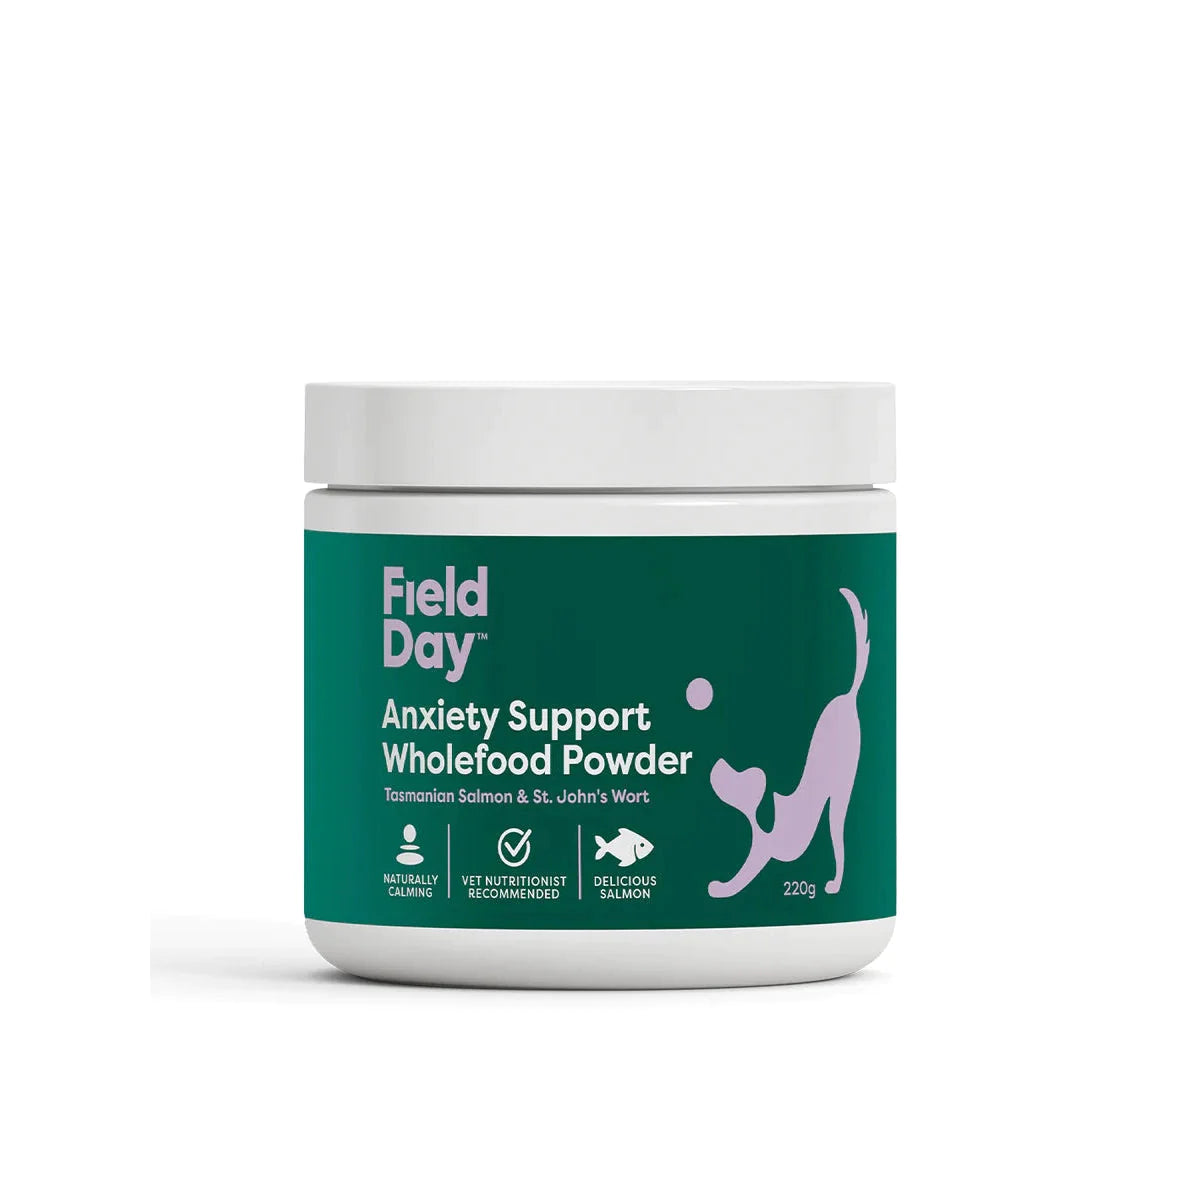 Field Day Anxiety Support Wholefood Powder